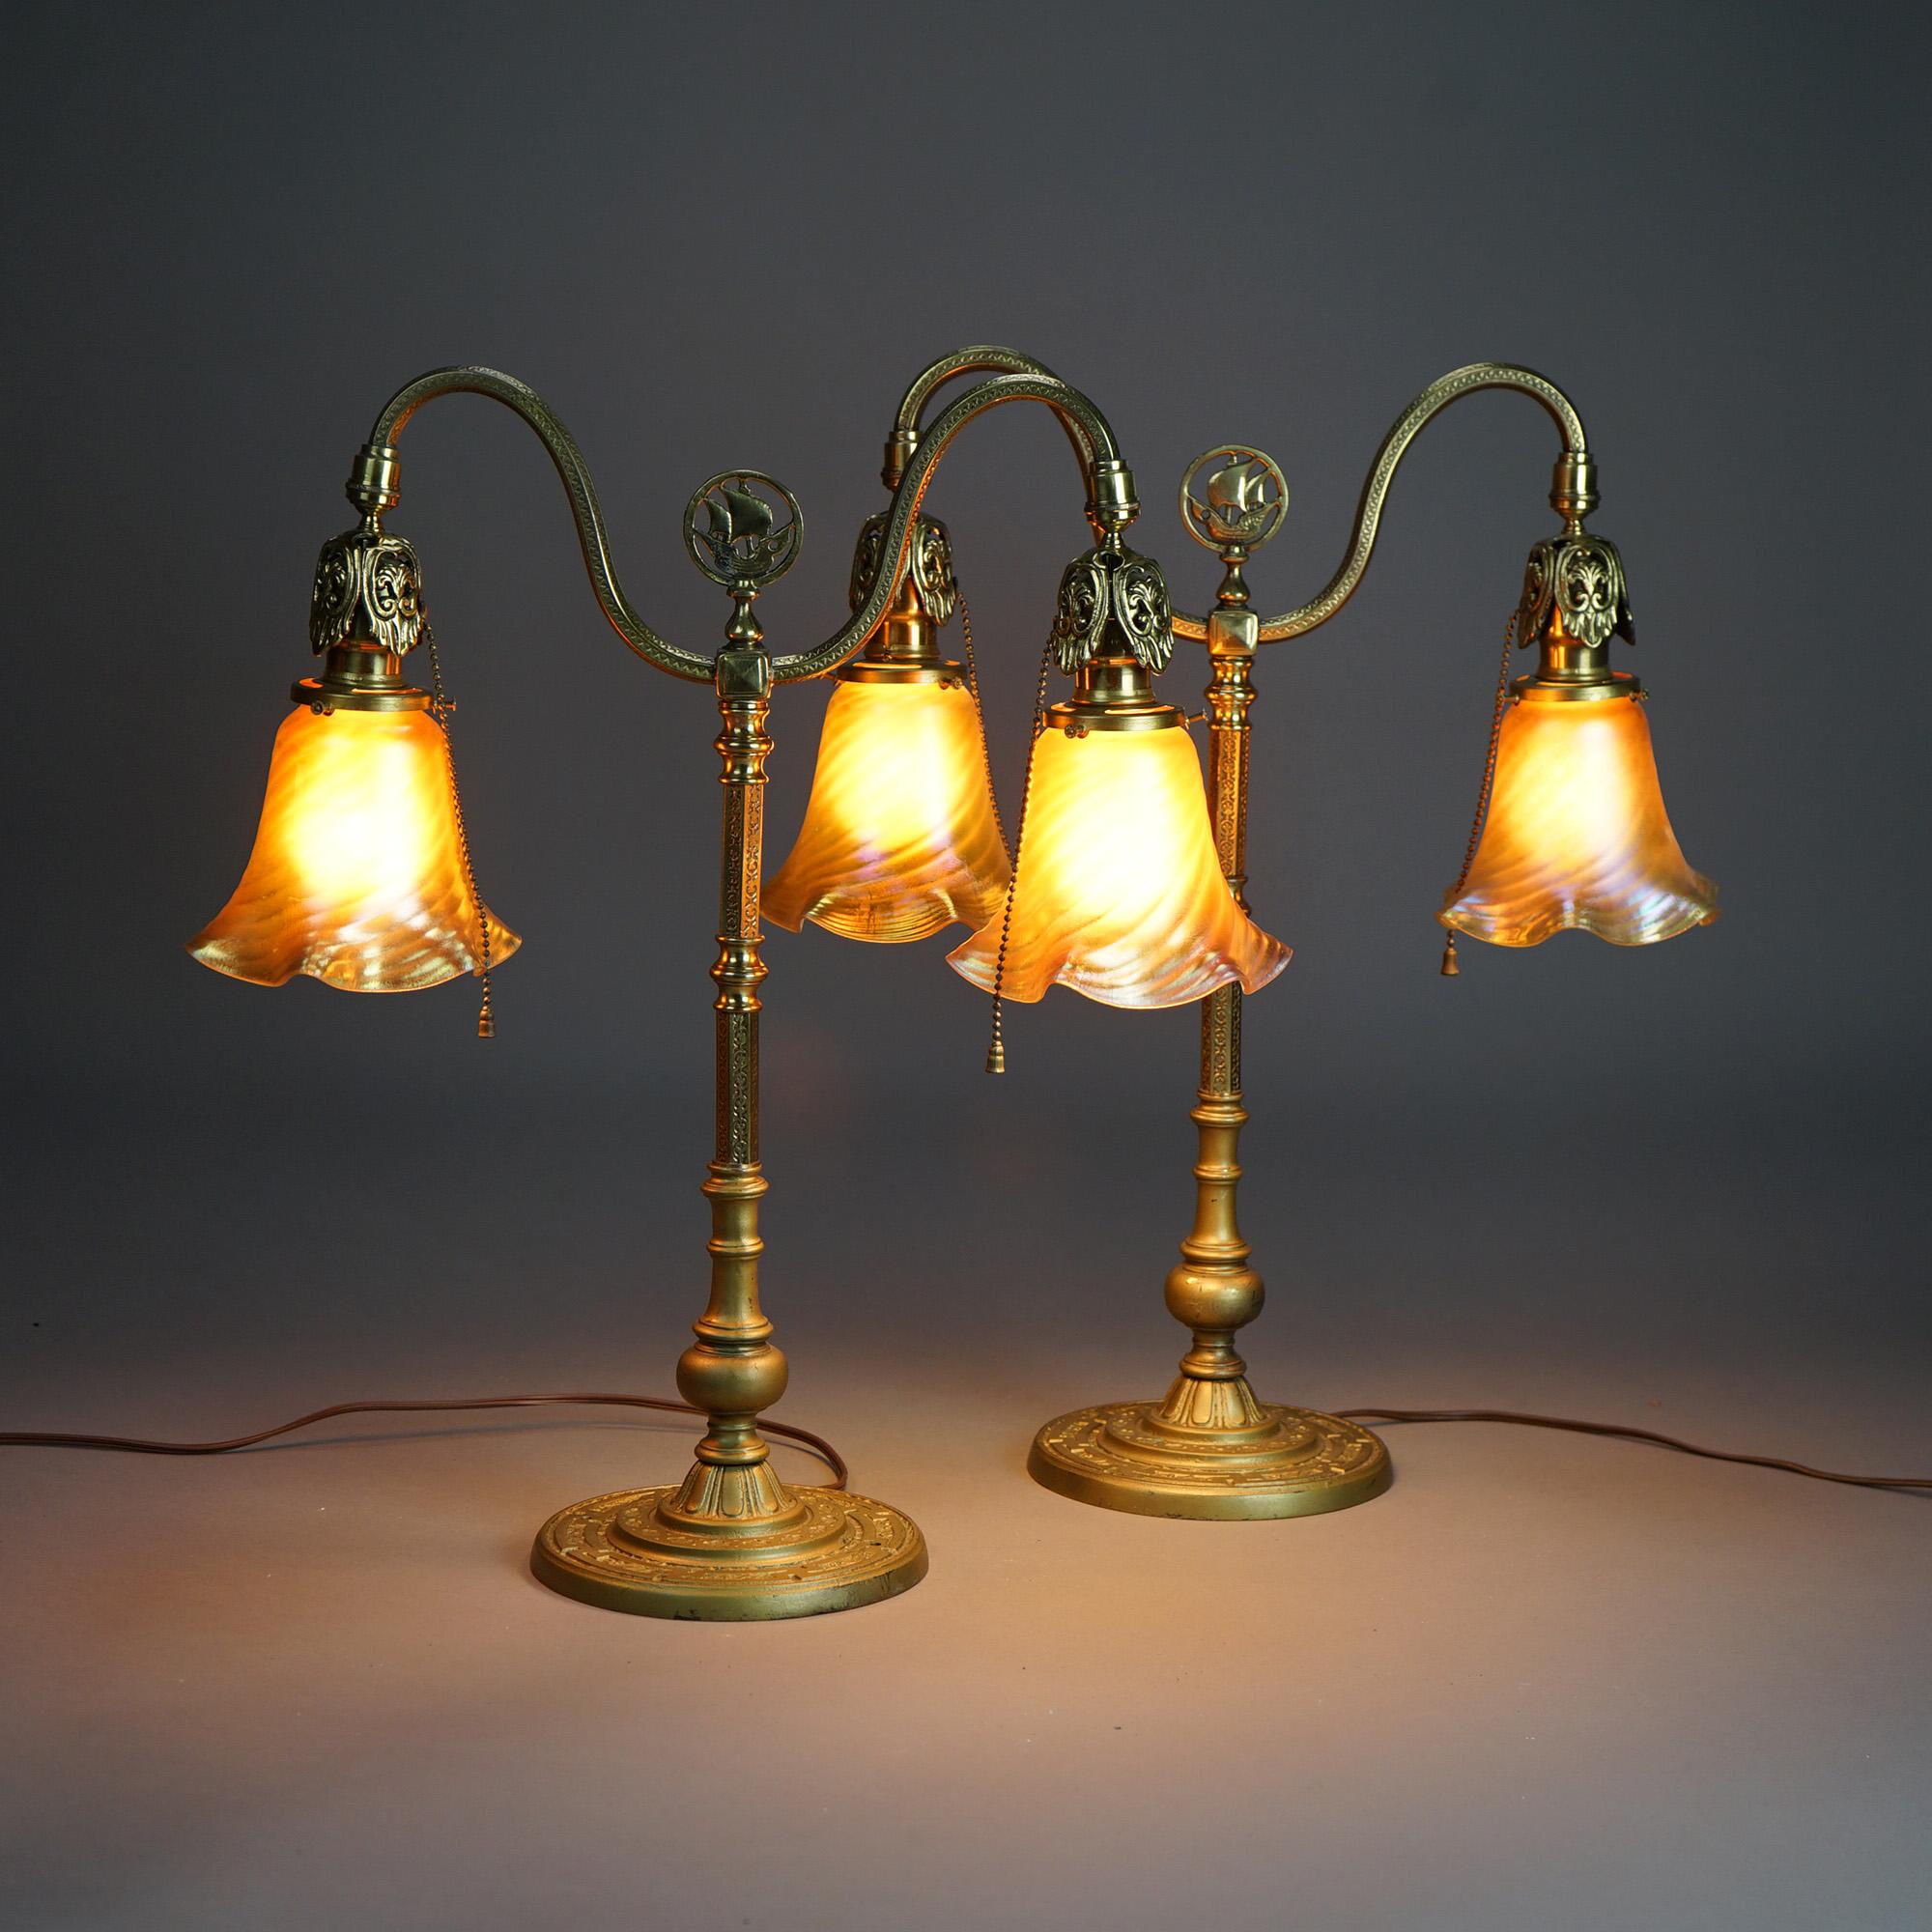 An antique pair of bankers lamps in the manner of  Rembrandt offer gilt cast  brass bases with scroll form double arms having central ship finials and terminating in art glass shades; embossed foliate designs throughout, c1920

Measure - 20.5